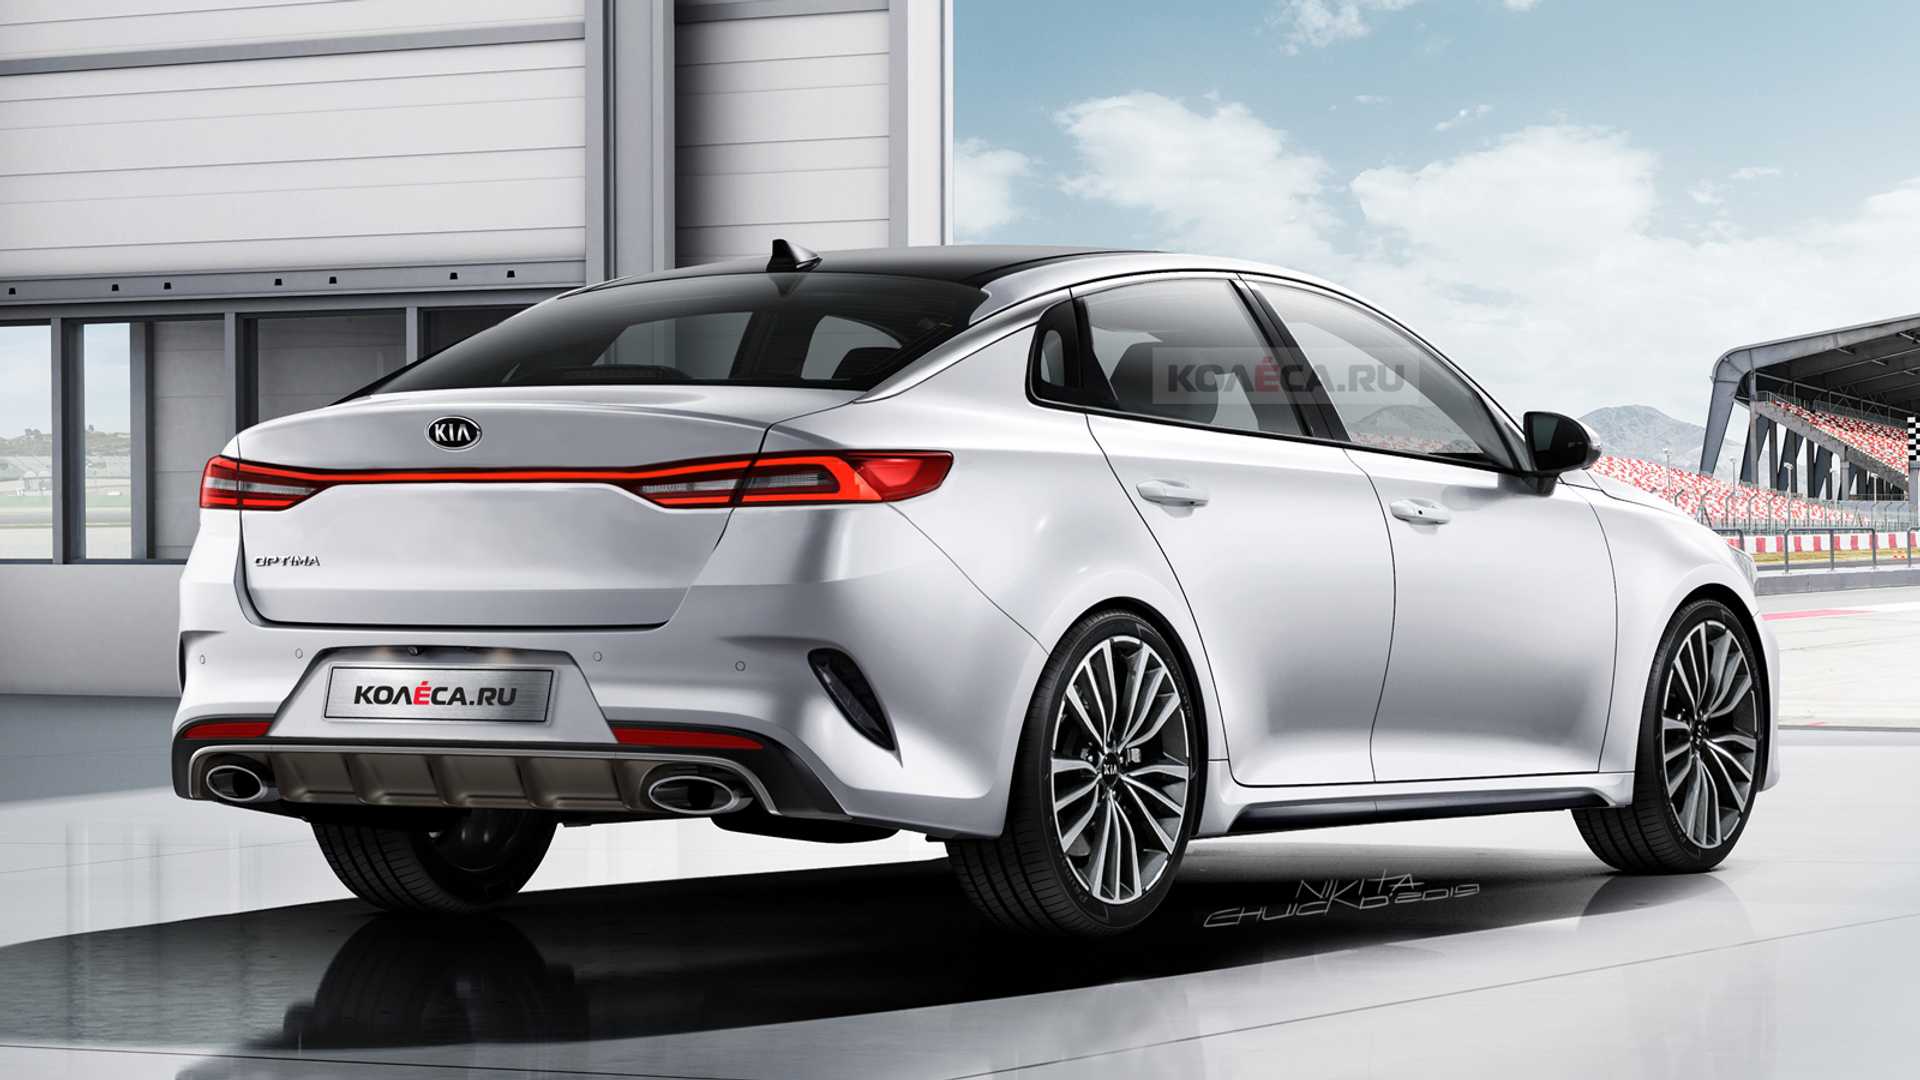 2021 Kia Optima Could Look More Conventional Than Sonata, Which Is a